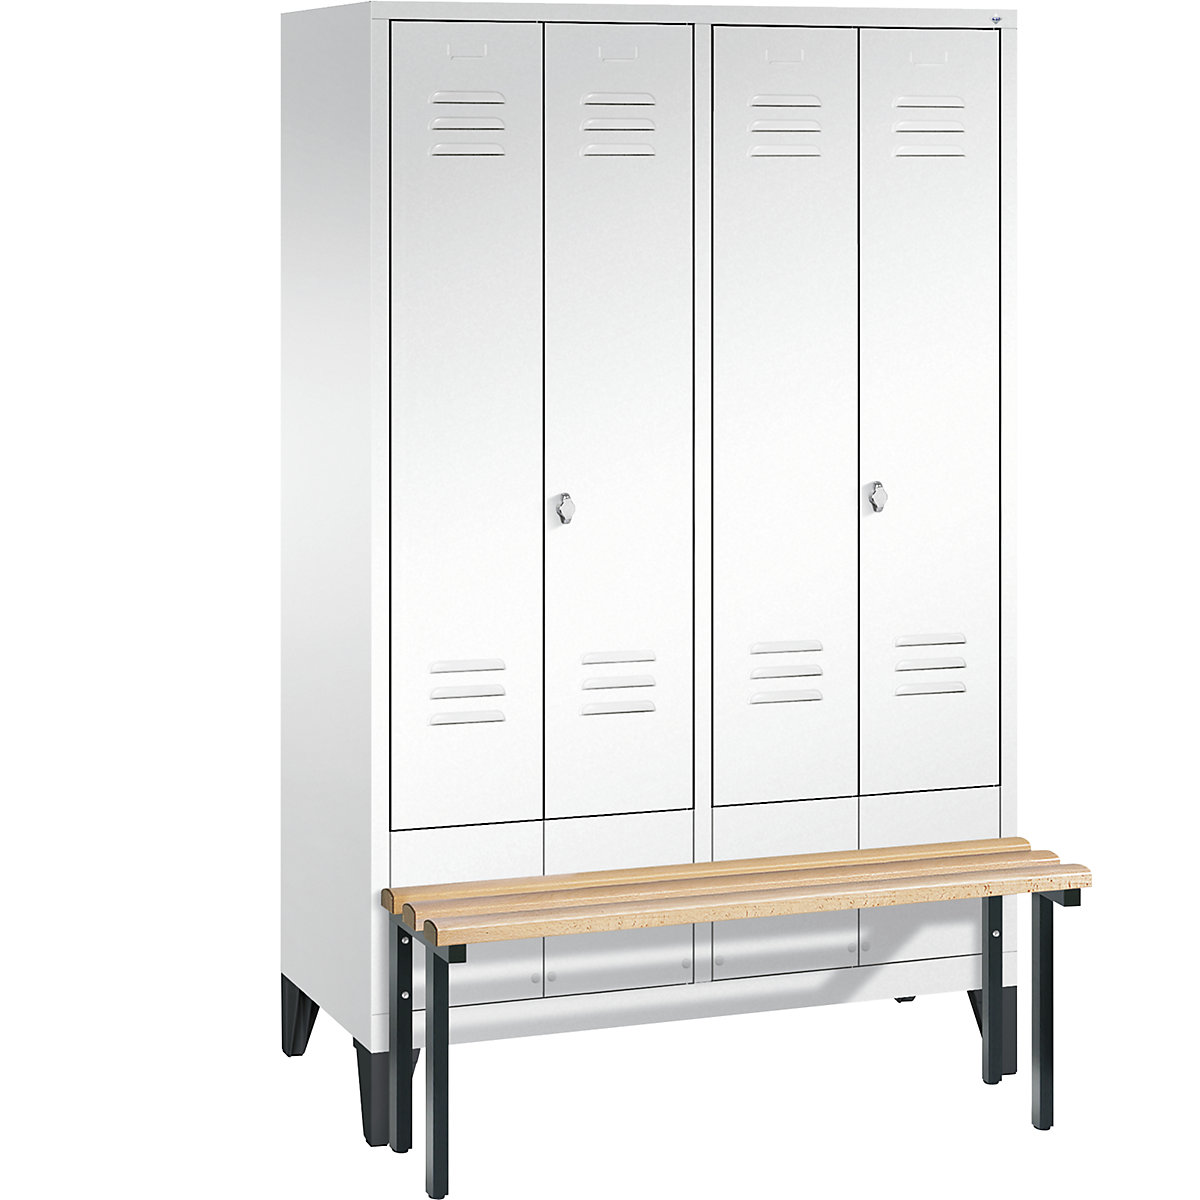 CLASSIC cloakroom locker with bench mounted at front, doors close in the middle - C+P